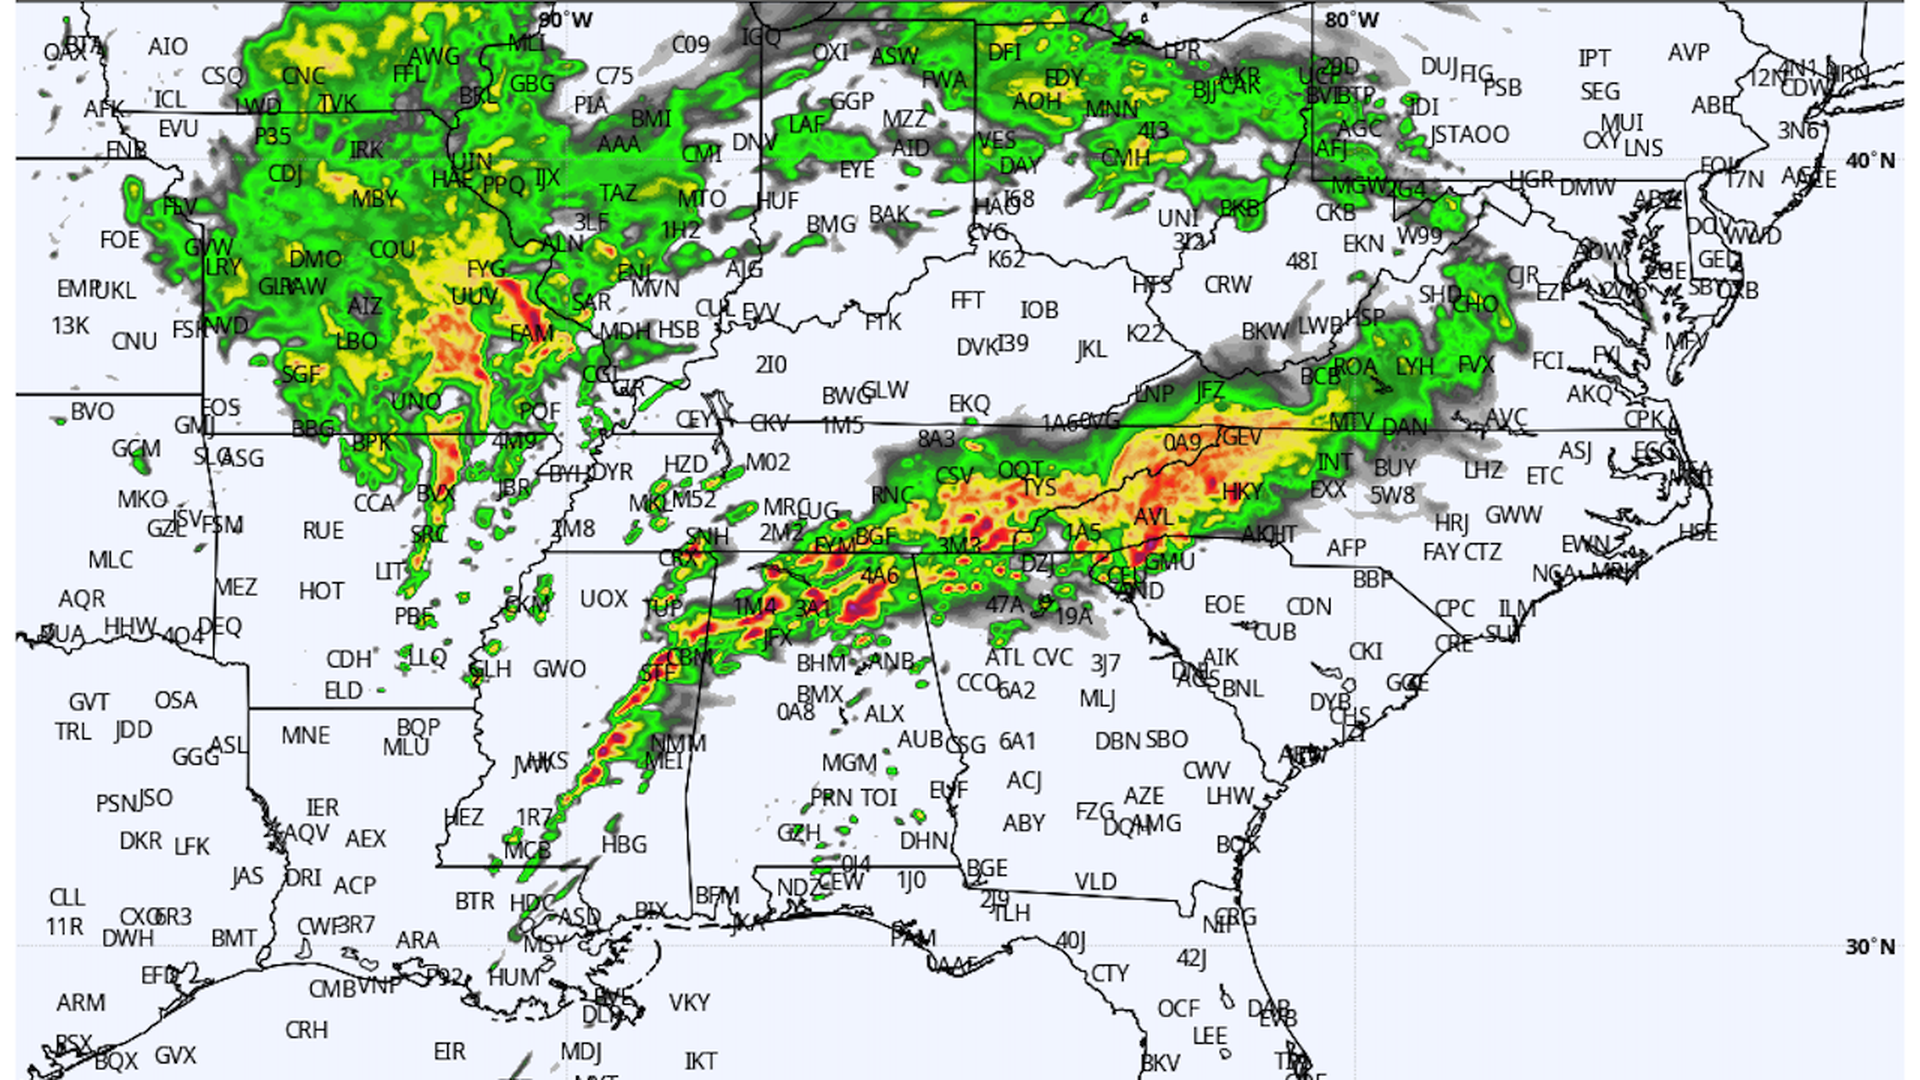 Simulated radar image during a severe weather outbreak on March 25, 2021.